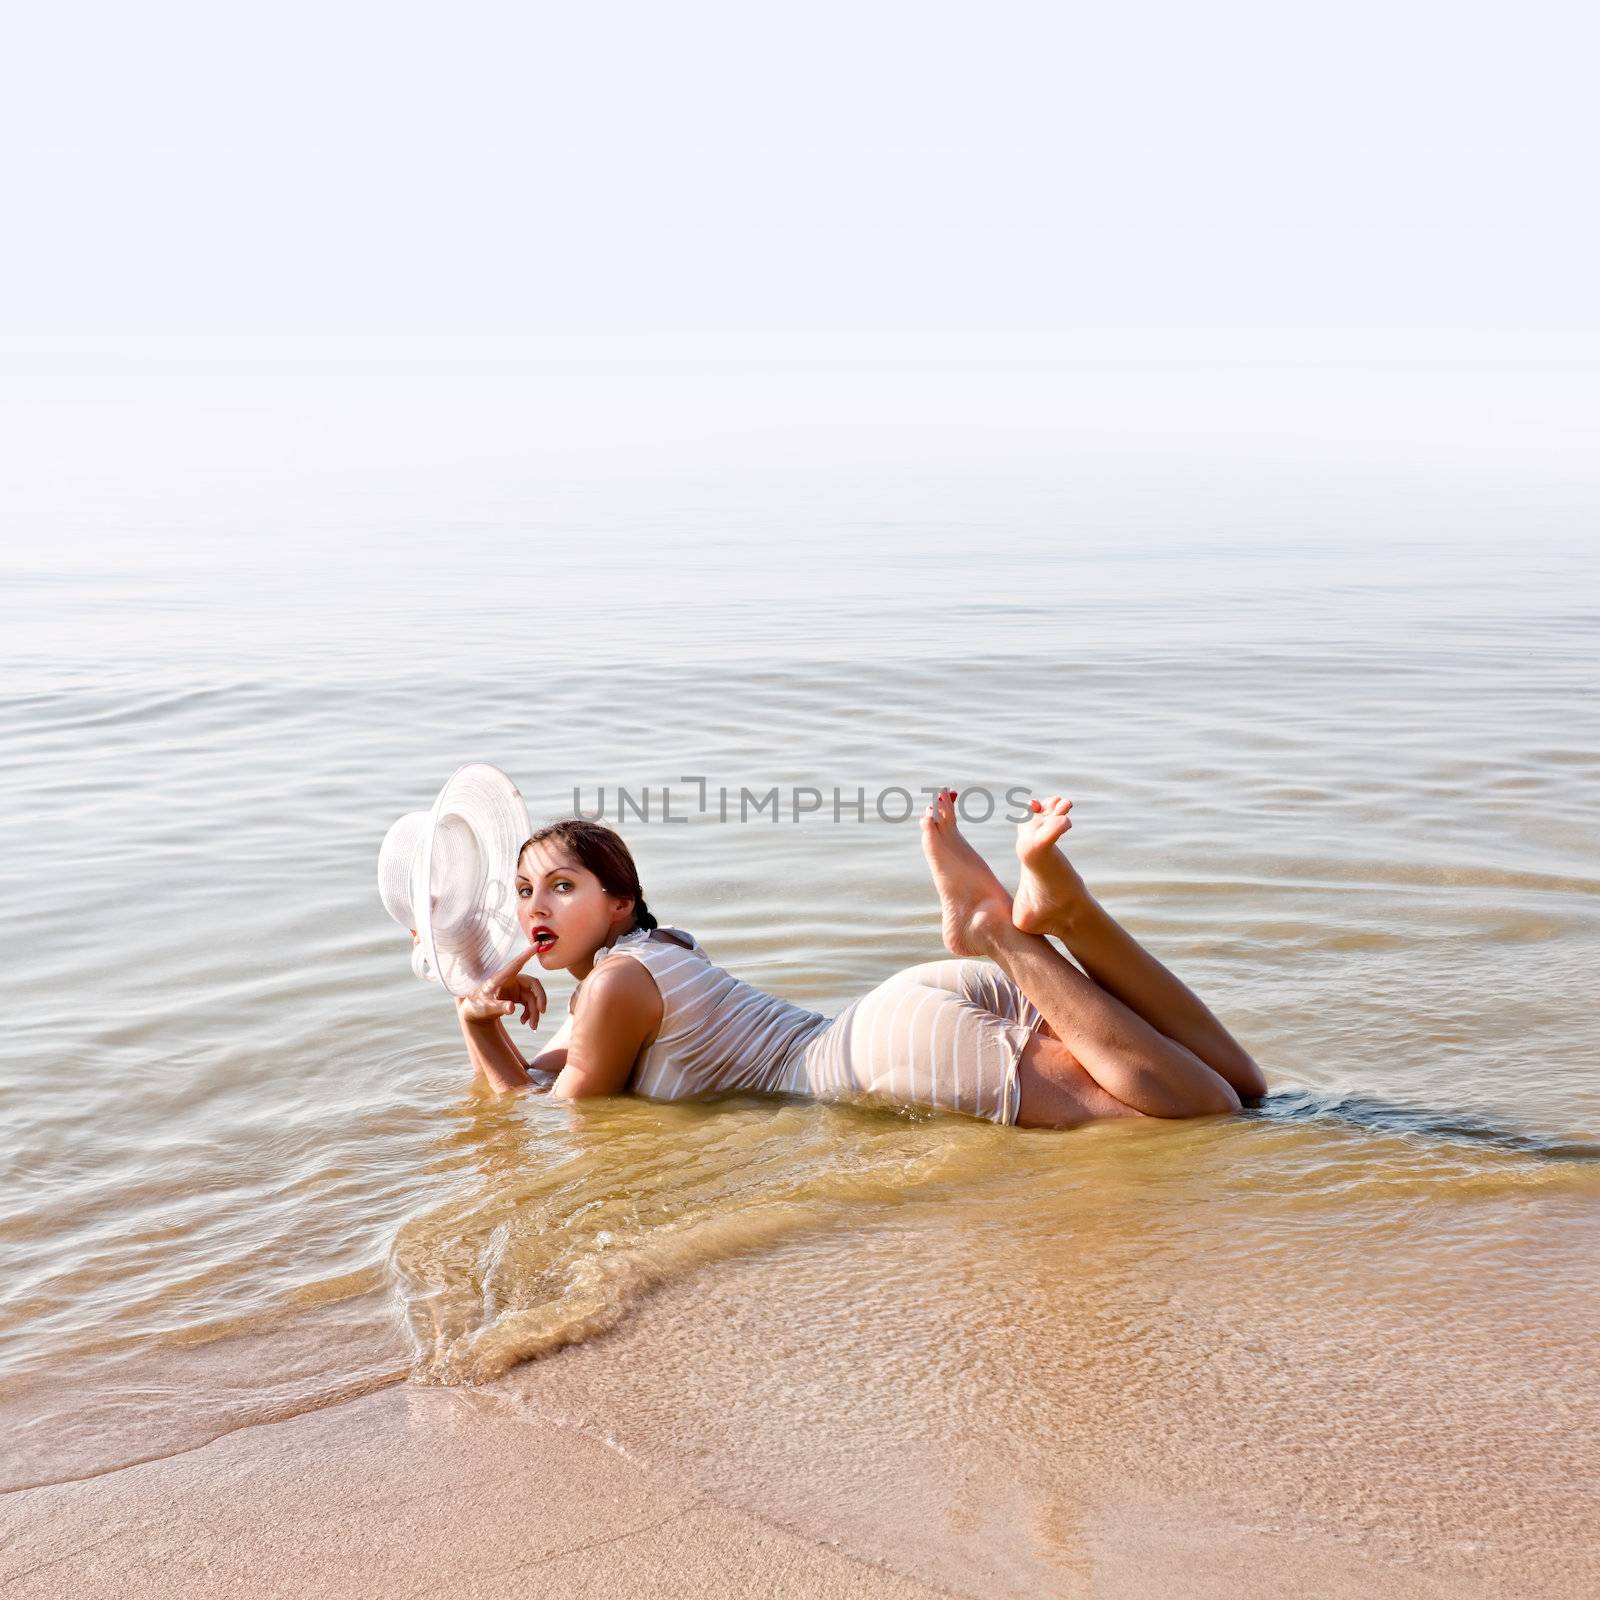 Woman in retro bathing suit and white hat lies in the water at the beach with room for text